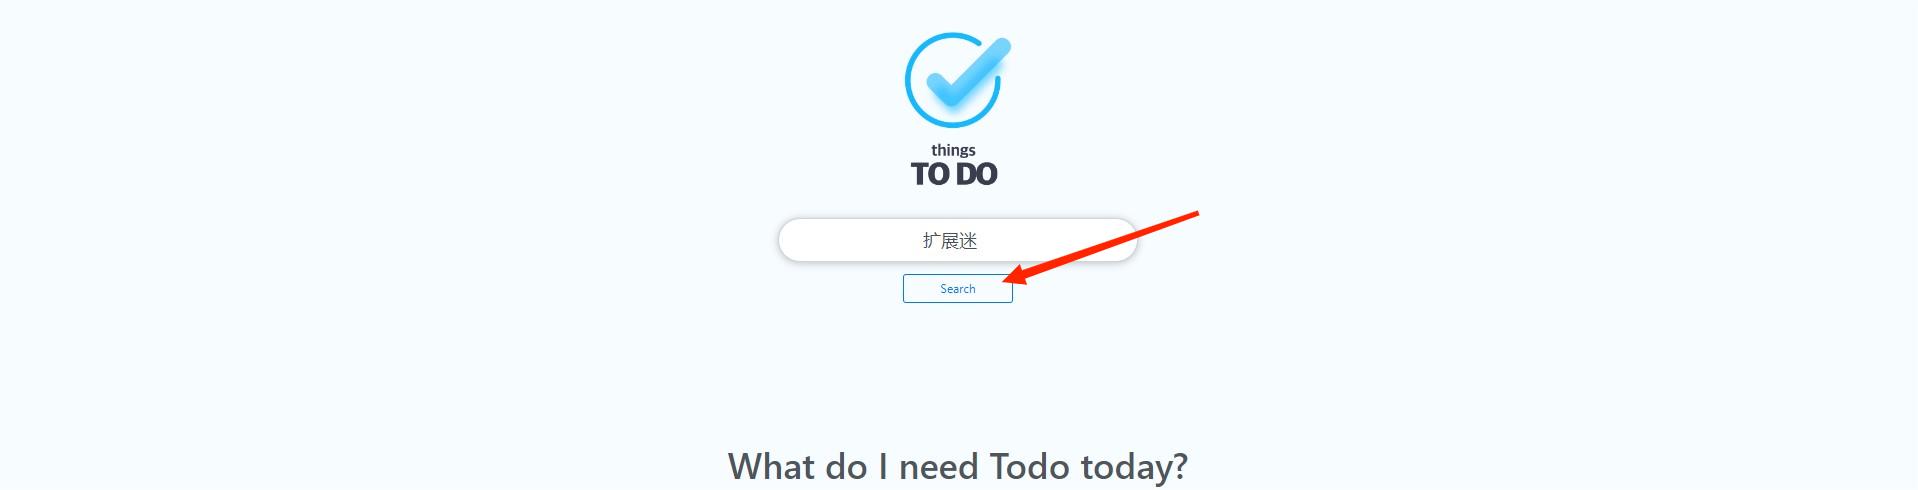 Things To Do 插件使用教程